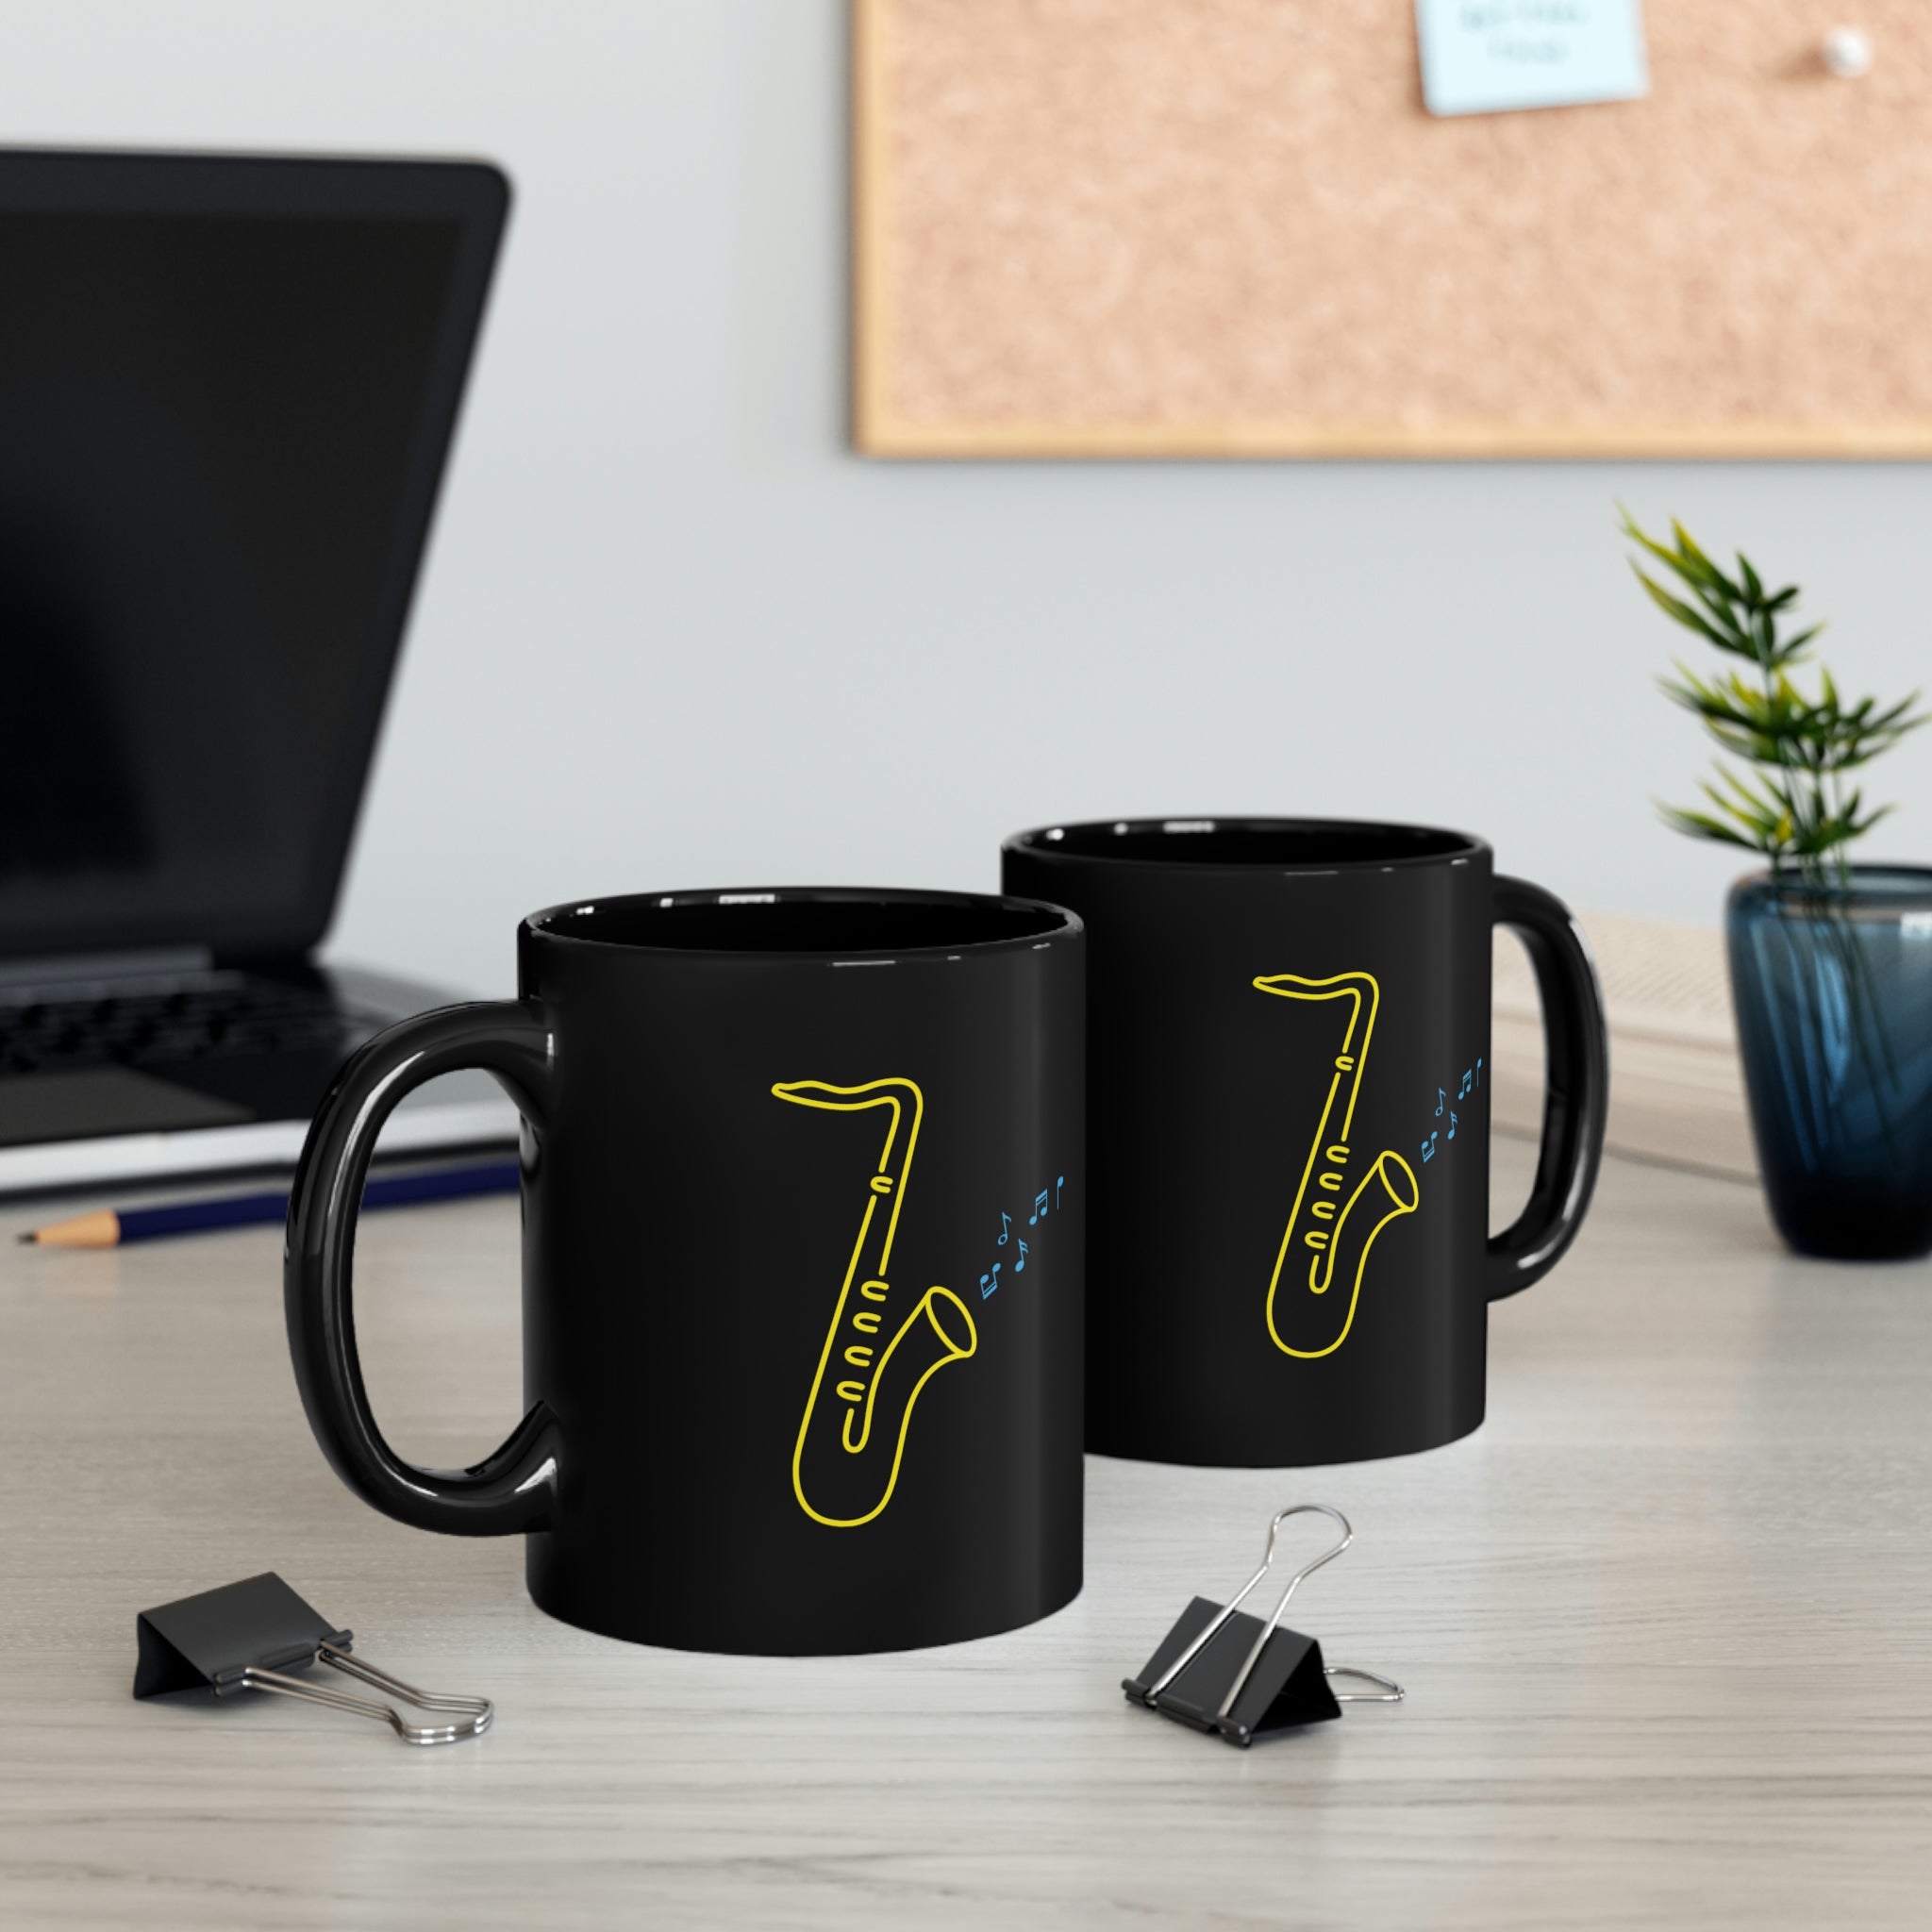 Black Mug with a vibrant neon design of a yellow saxophone and blue musical notes, from the TEQNEON Music Box and Accessories collections